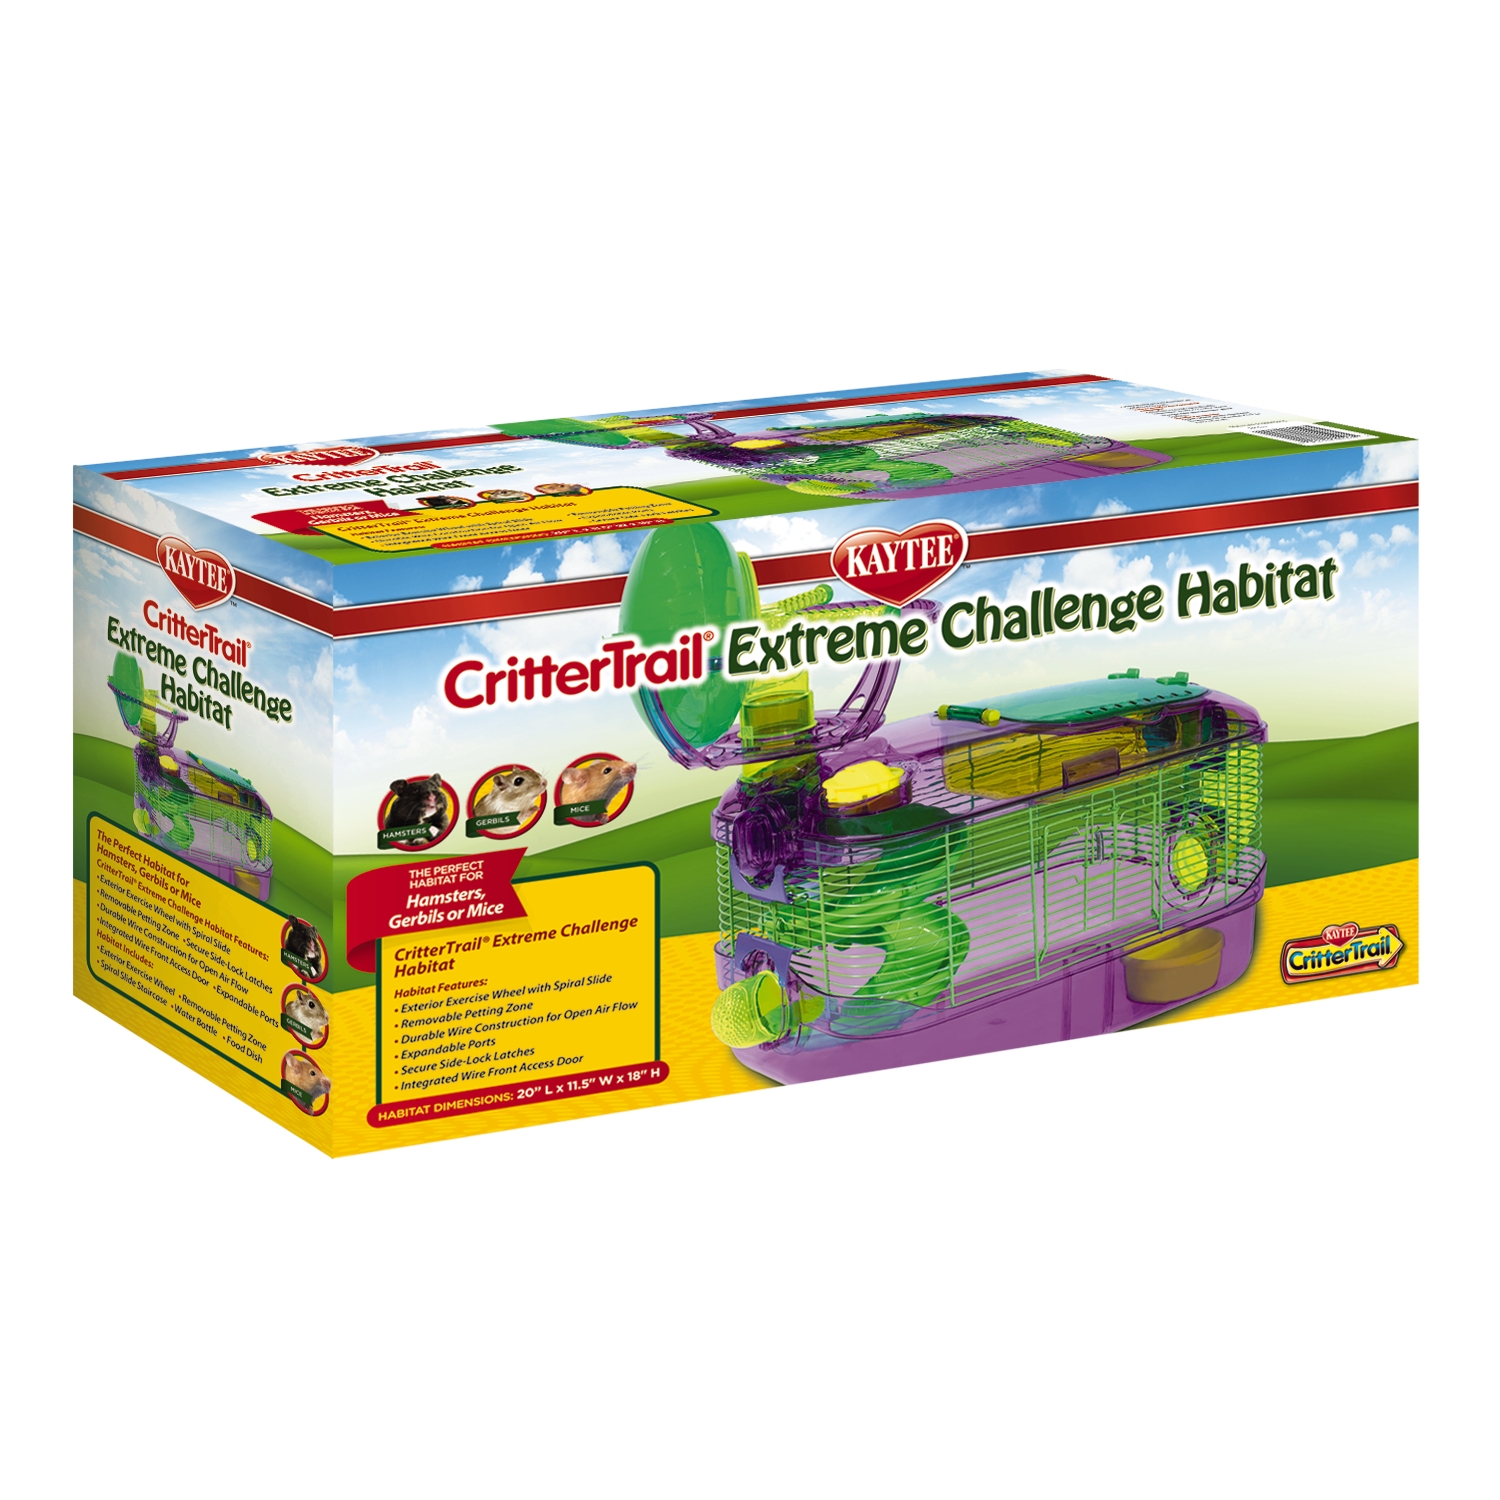 Crittertrail Extreme Challenge Habitat : Hamster, Gerbil, and